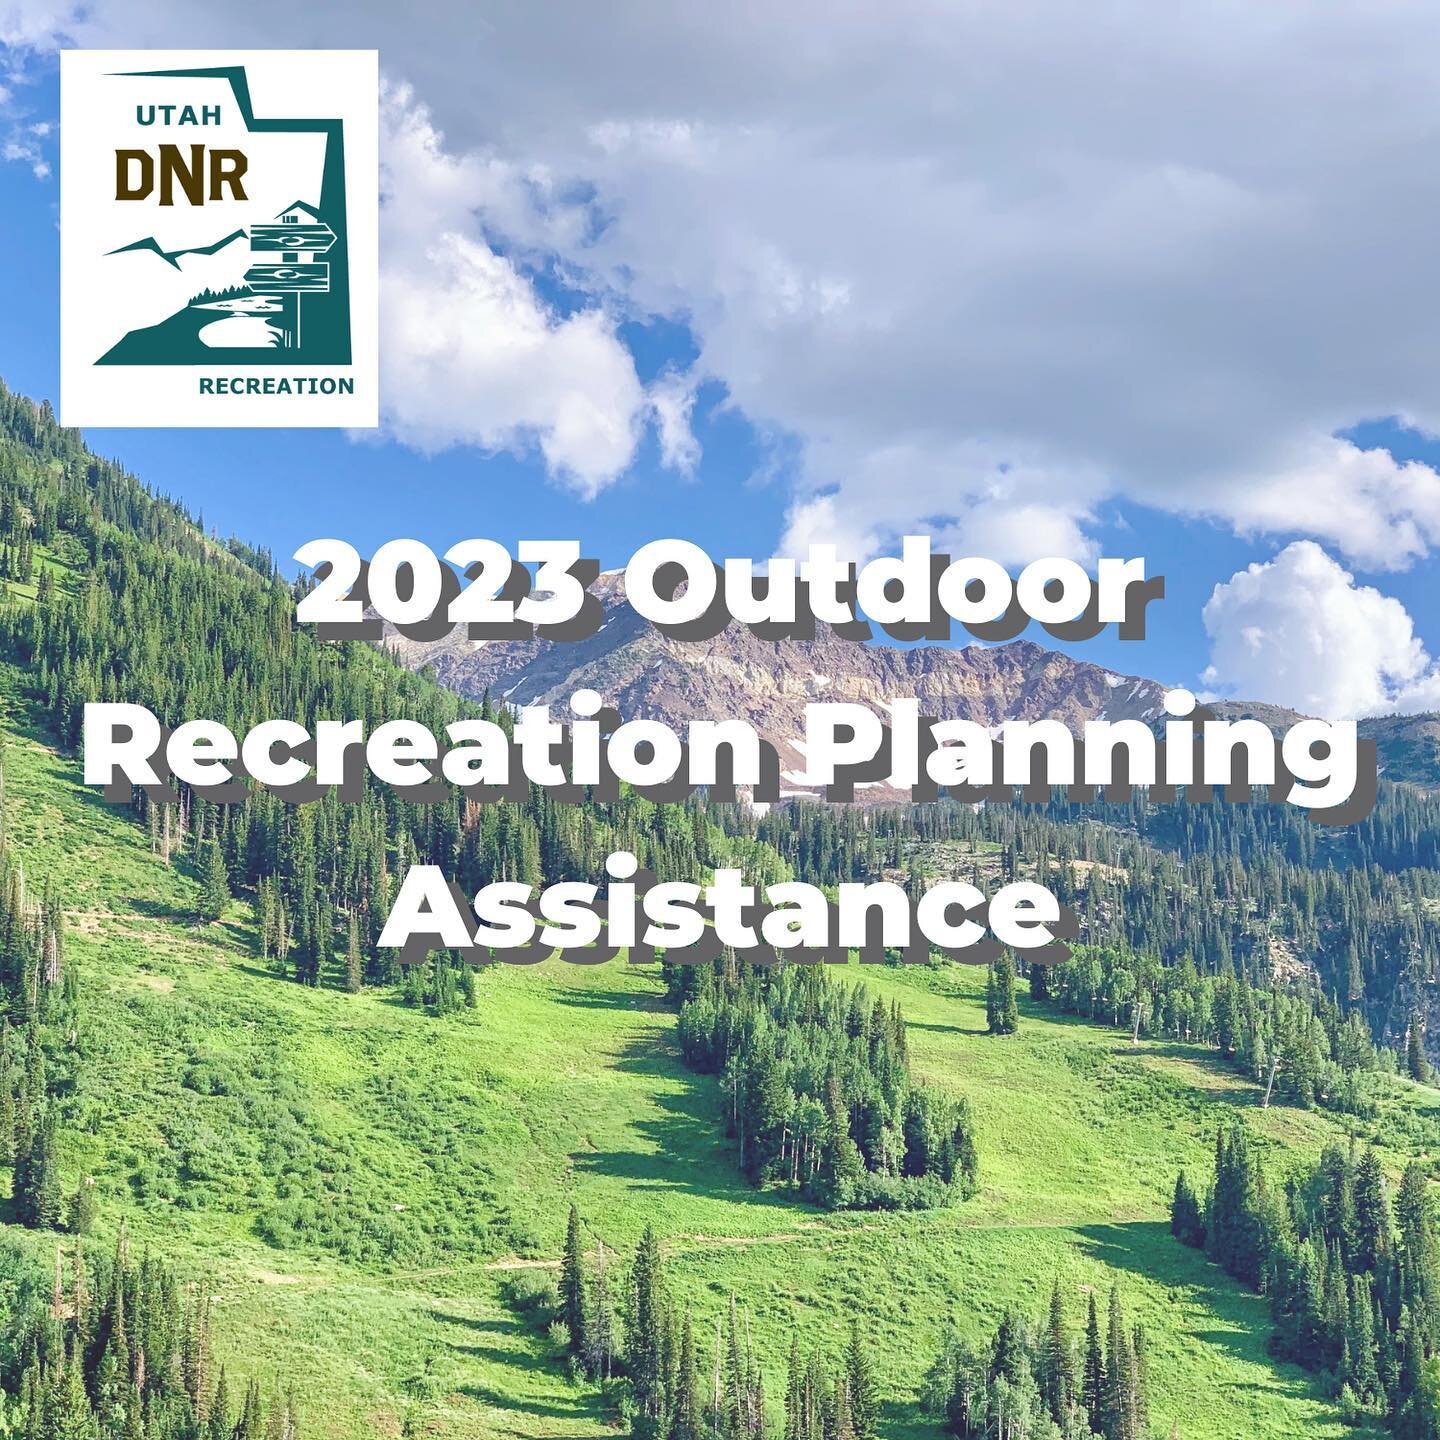 The Outdoor Recreation Planning Assistance Program (ORPA) application is about to close! The ORPA is a newly developed technical assistance service intended to build capacity at the local level to support outdoor recreation in Utah. ORPA aims to supp